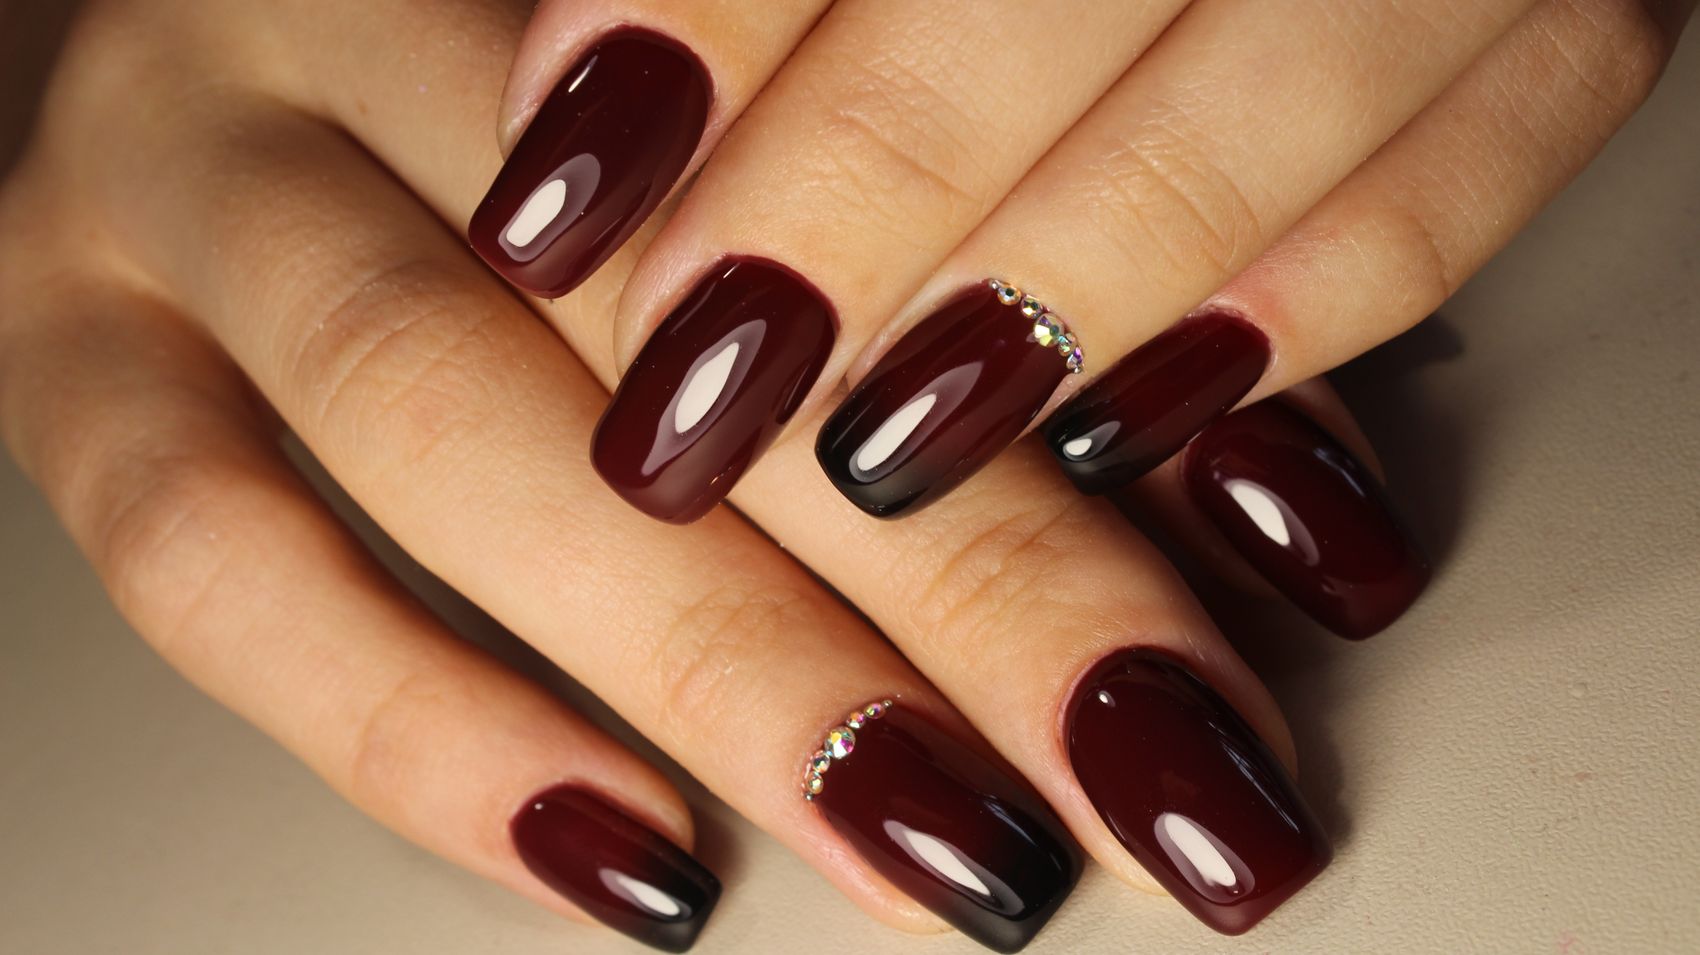 9. "The Most Popular Nail Colors of the Season" - wide 7